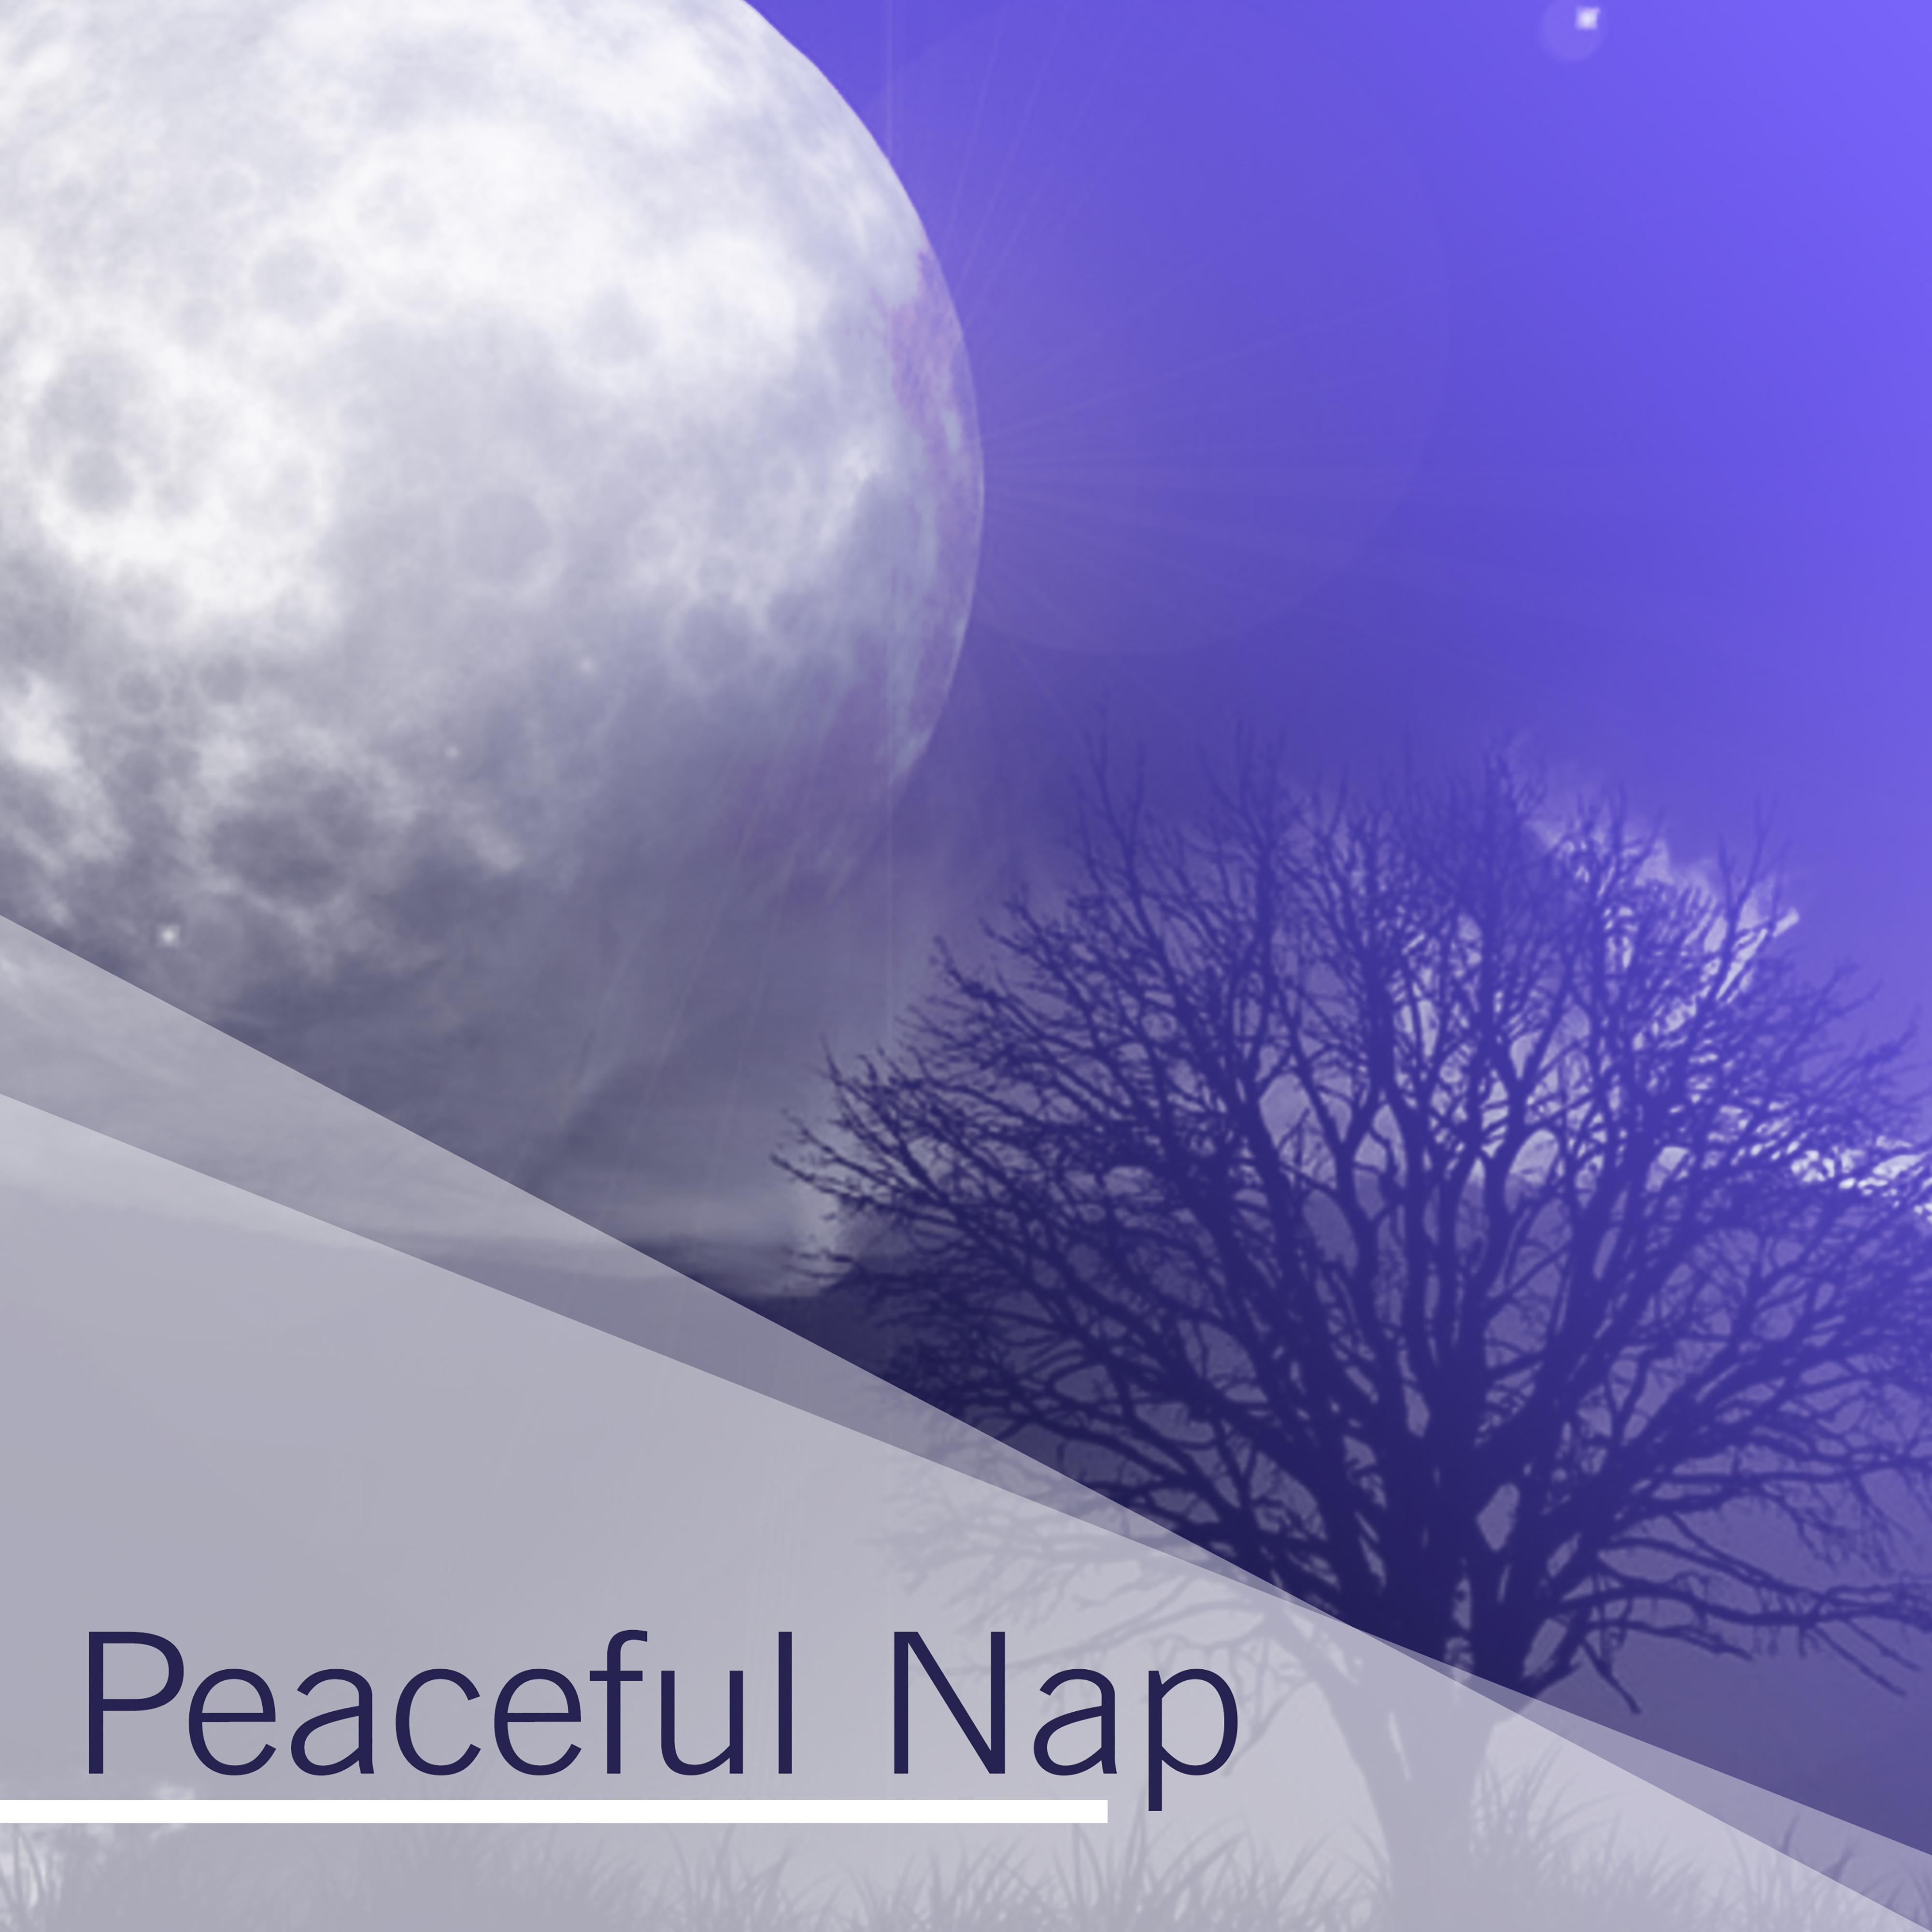 Peaceful Nap – Relaxing Music at Goodnight, Restful Sleep, Nature Sounds to Pillow, Sweet Dreams, Lullaby